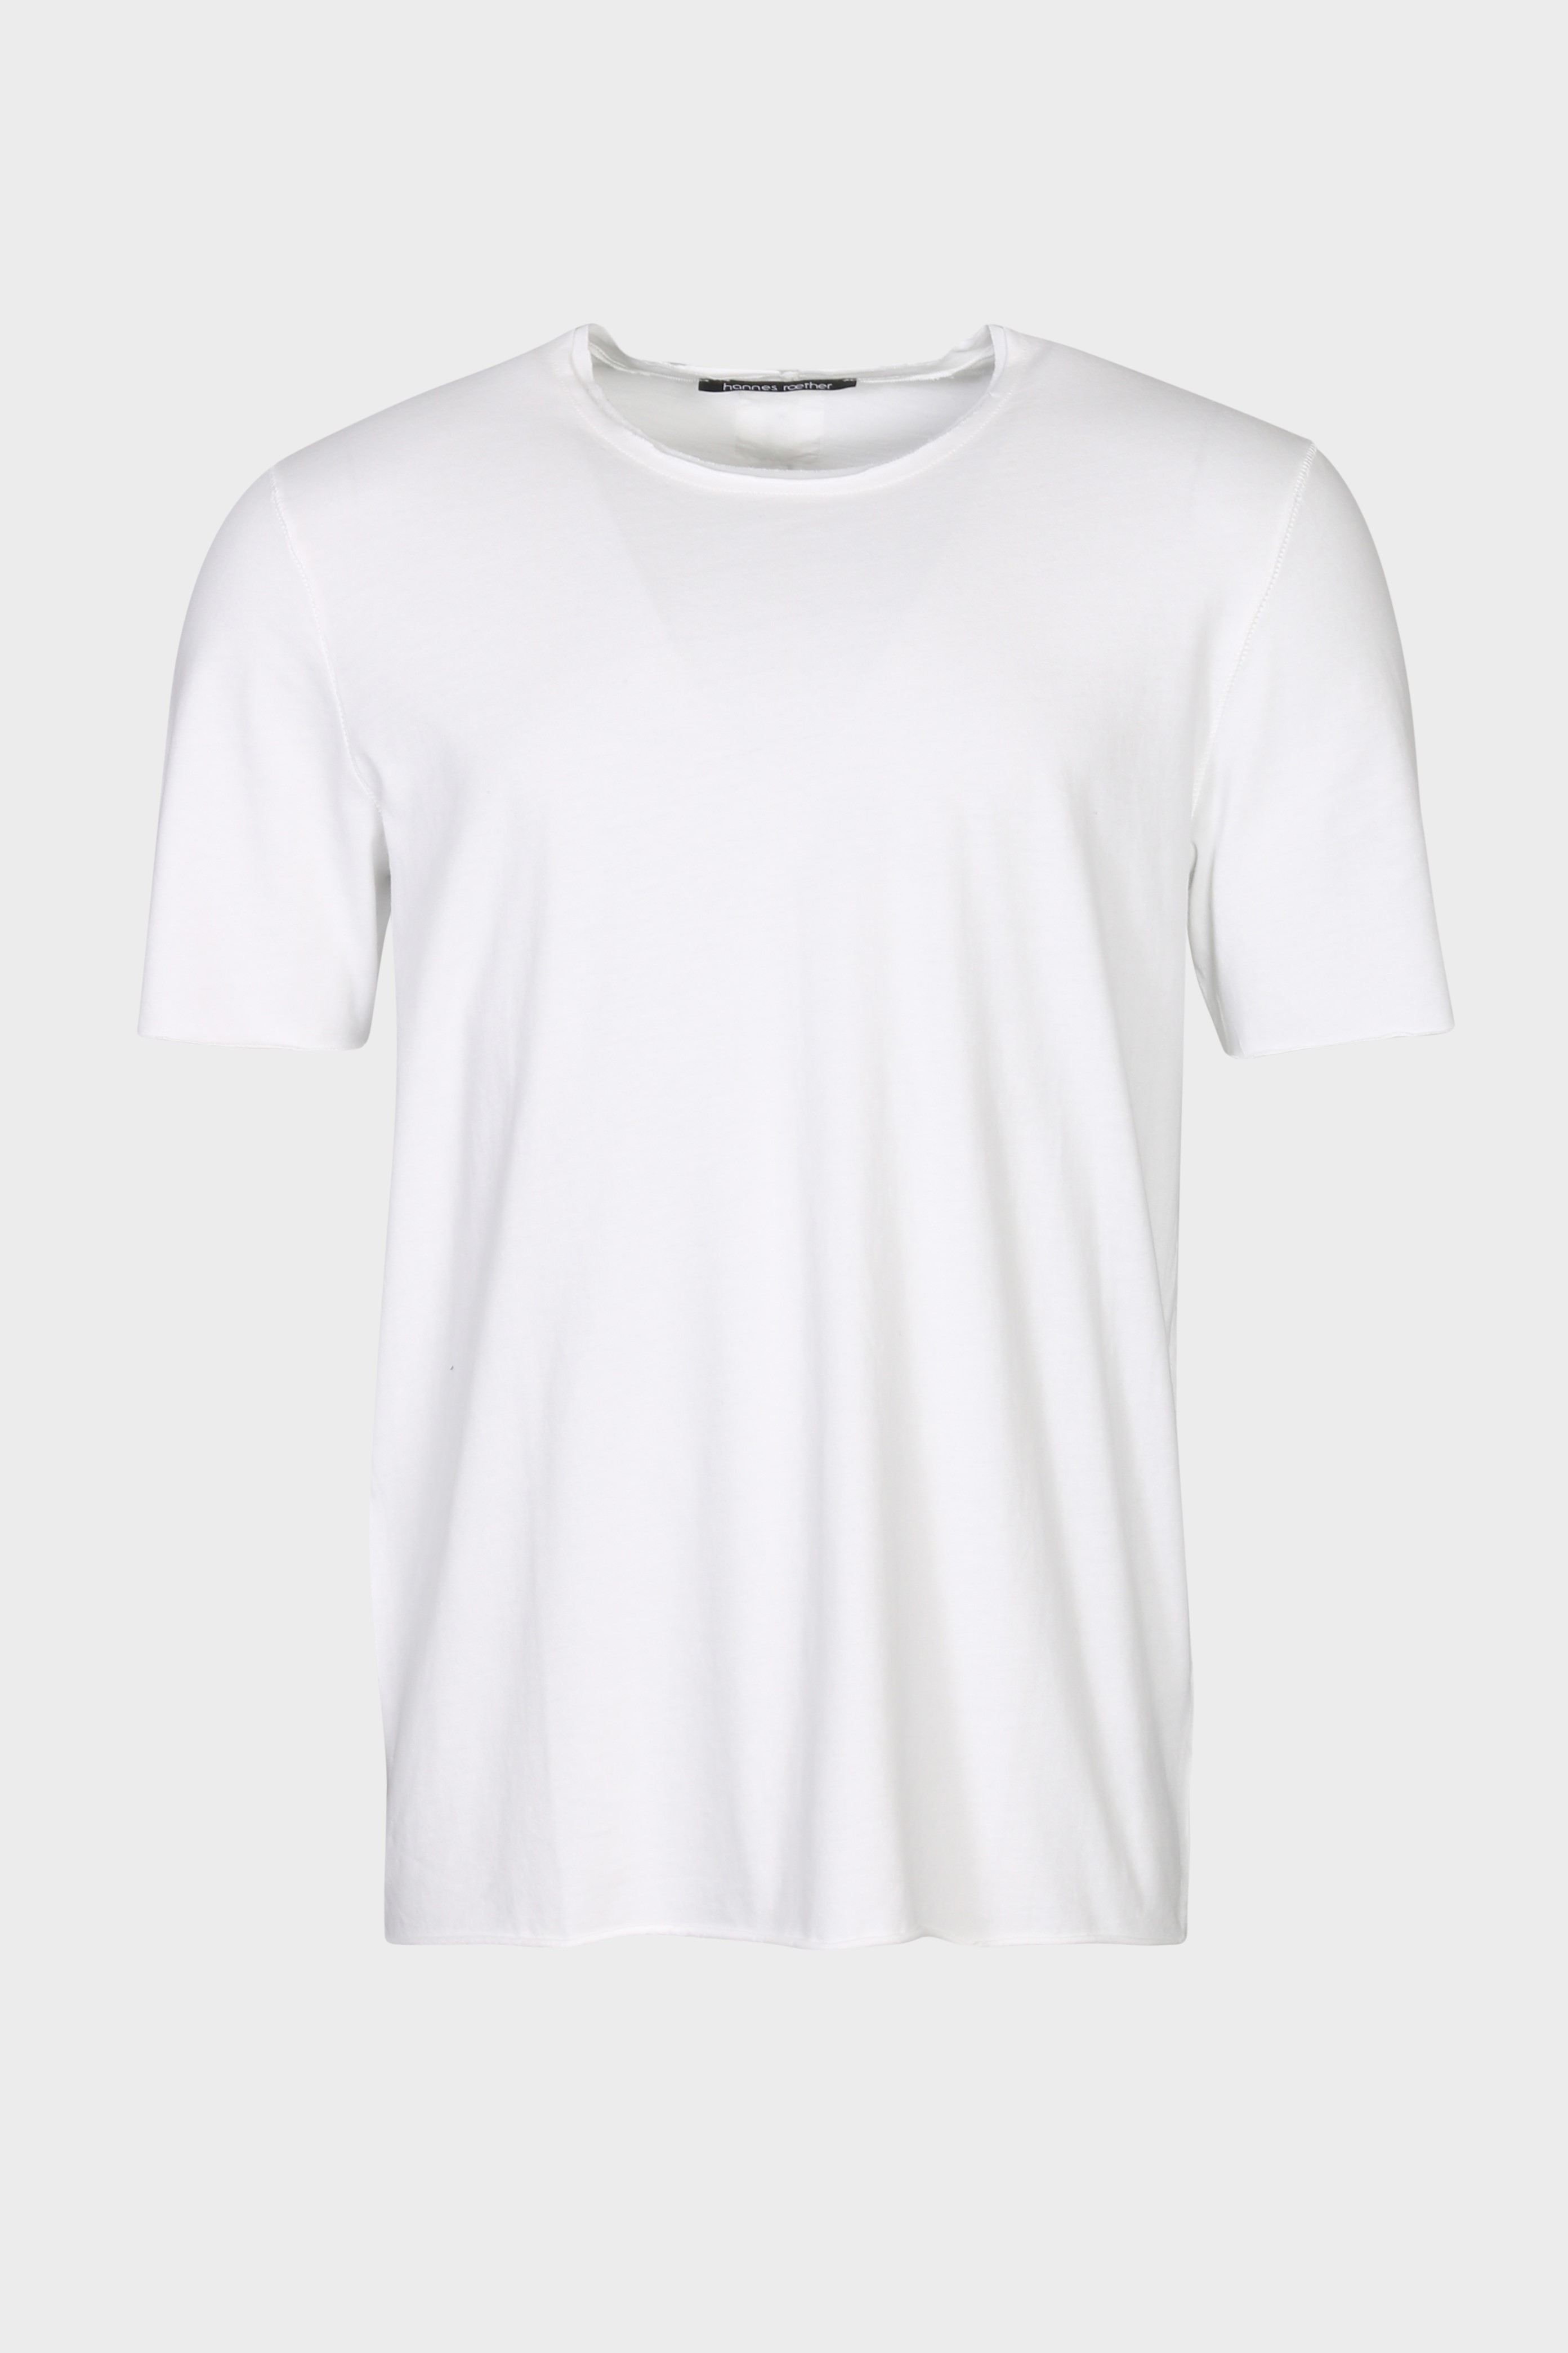 HANNES ROETHER T-Shirt in White 2XL